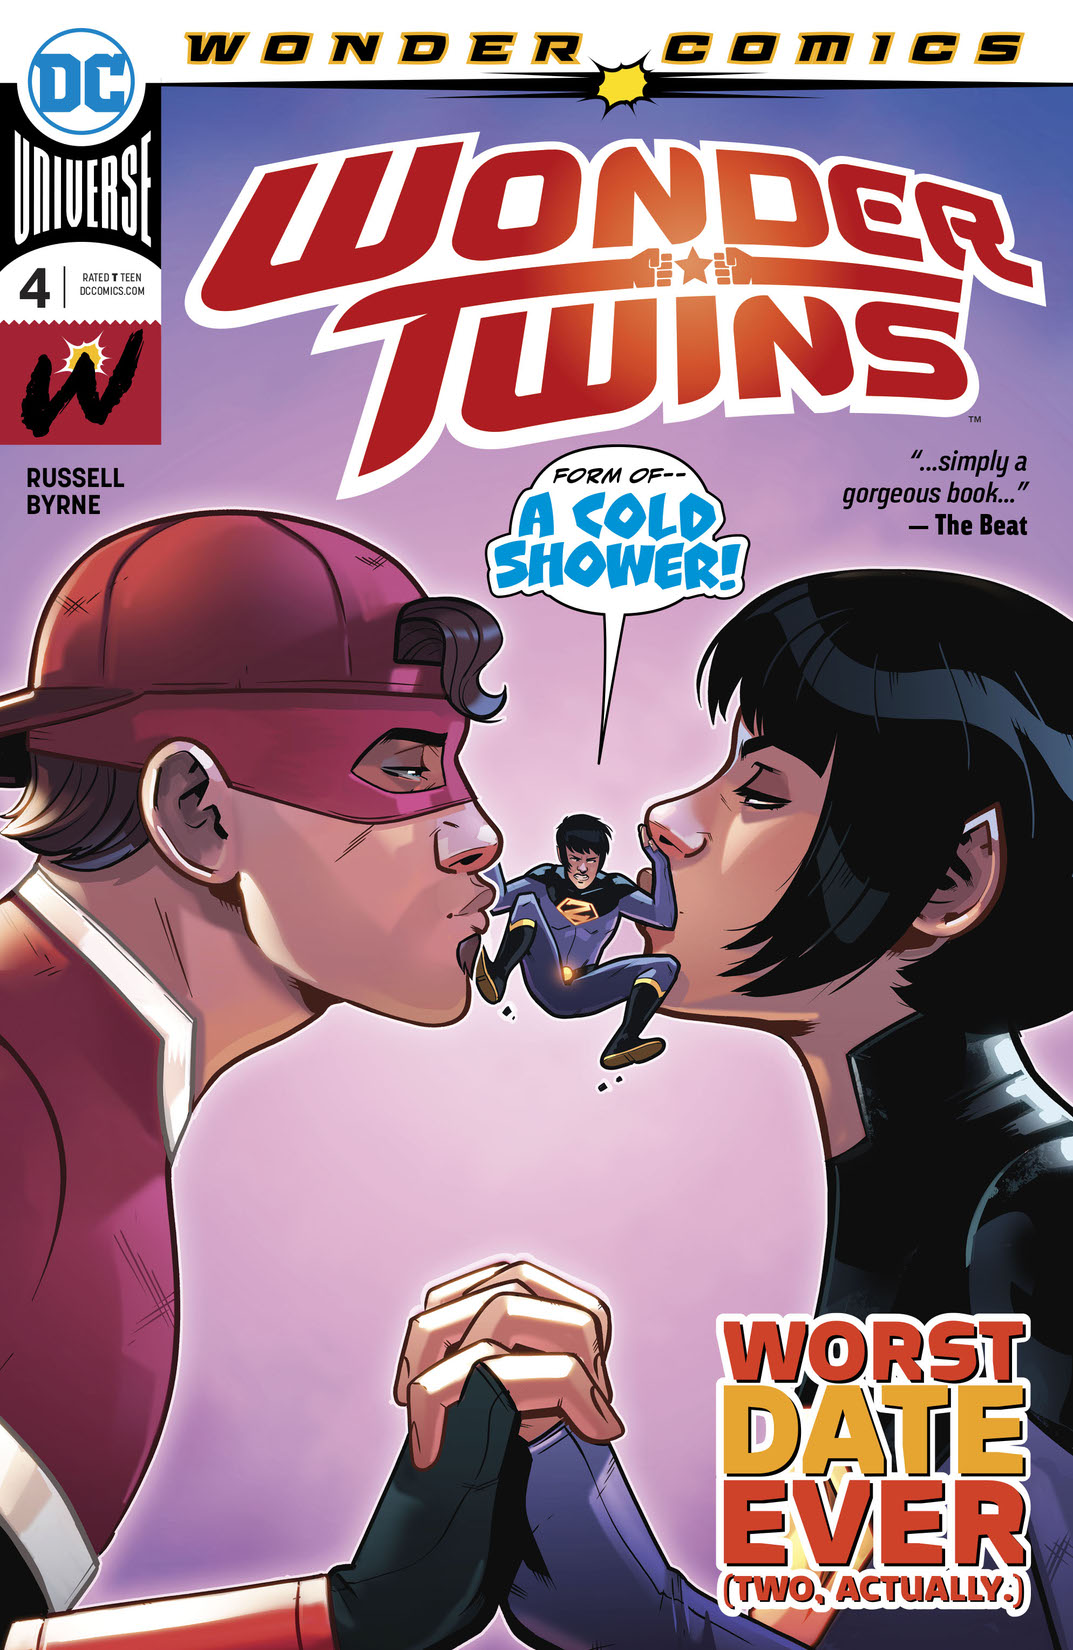 Wonder Twins #4 preview images